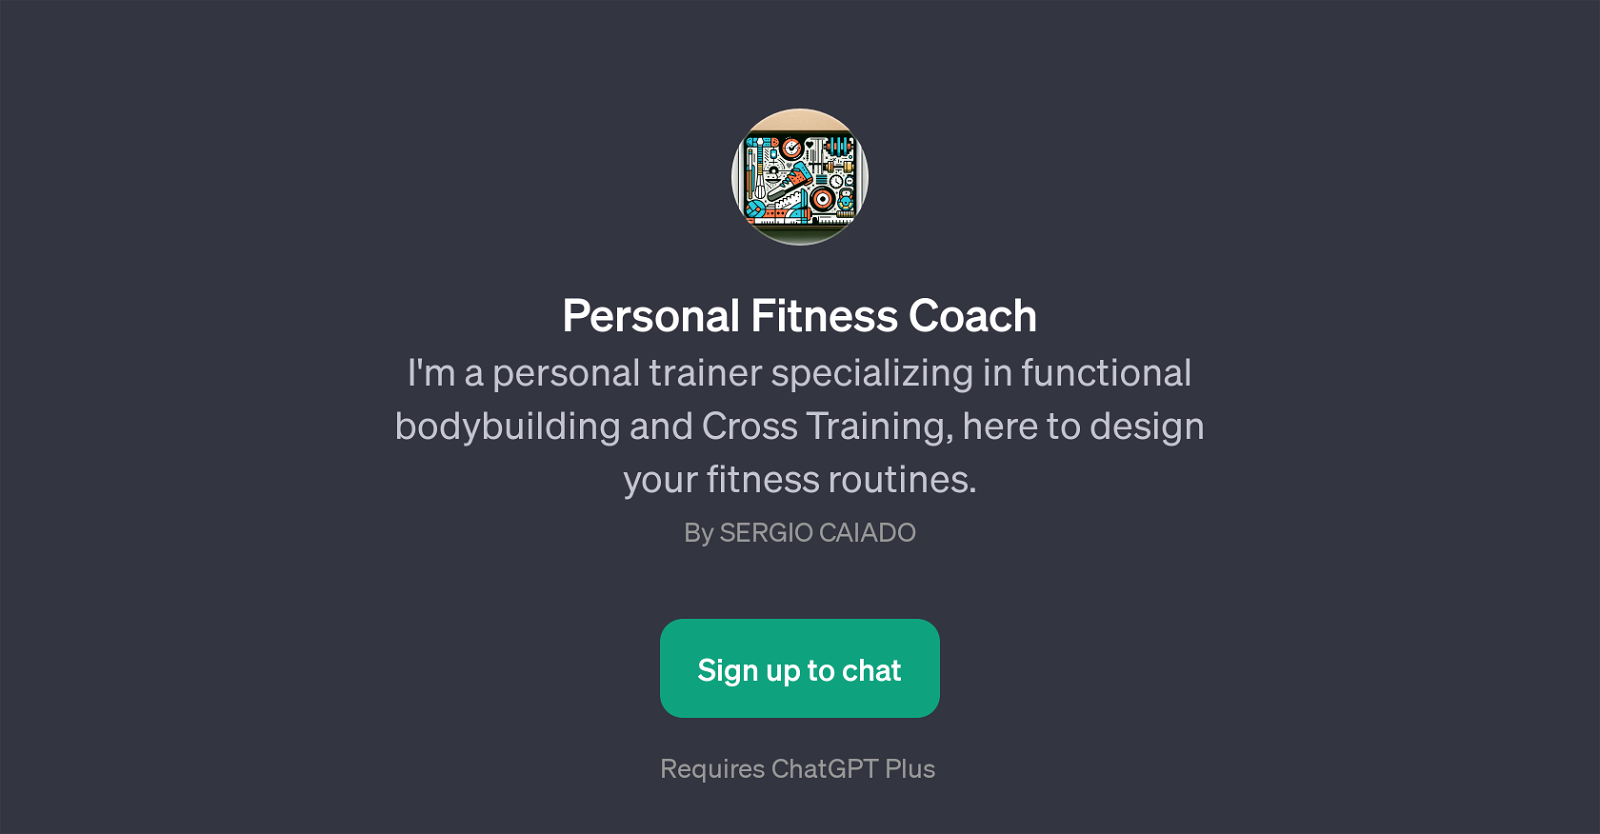 Personal Fitness Coach website